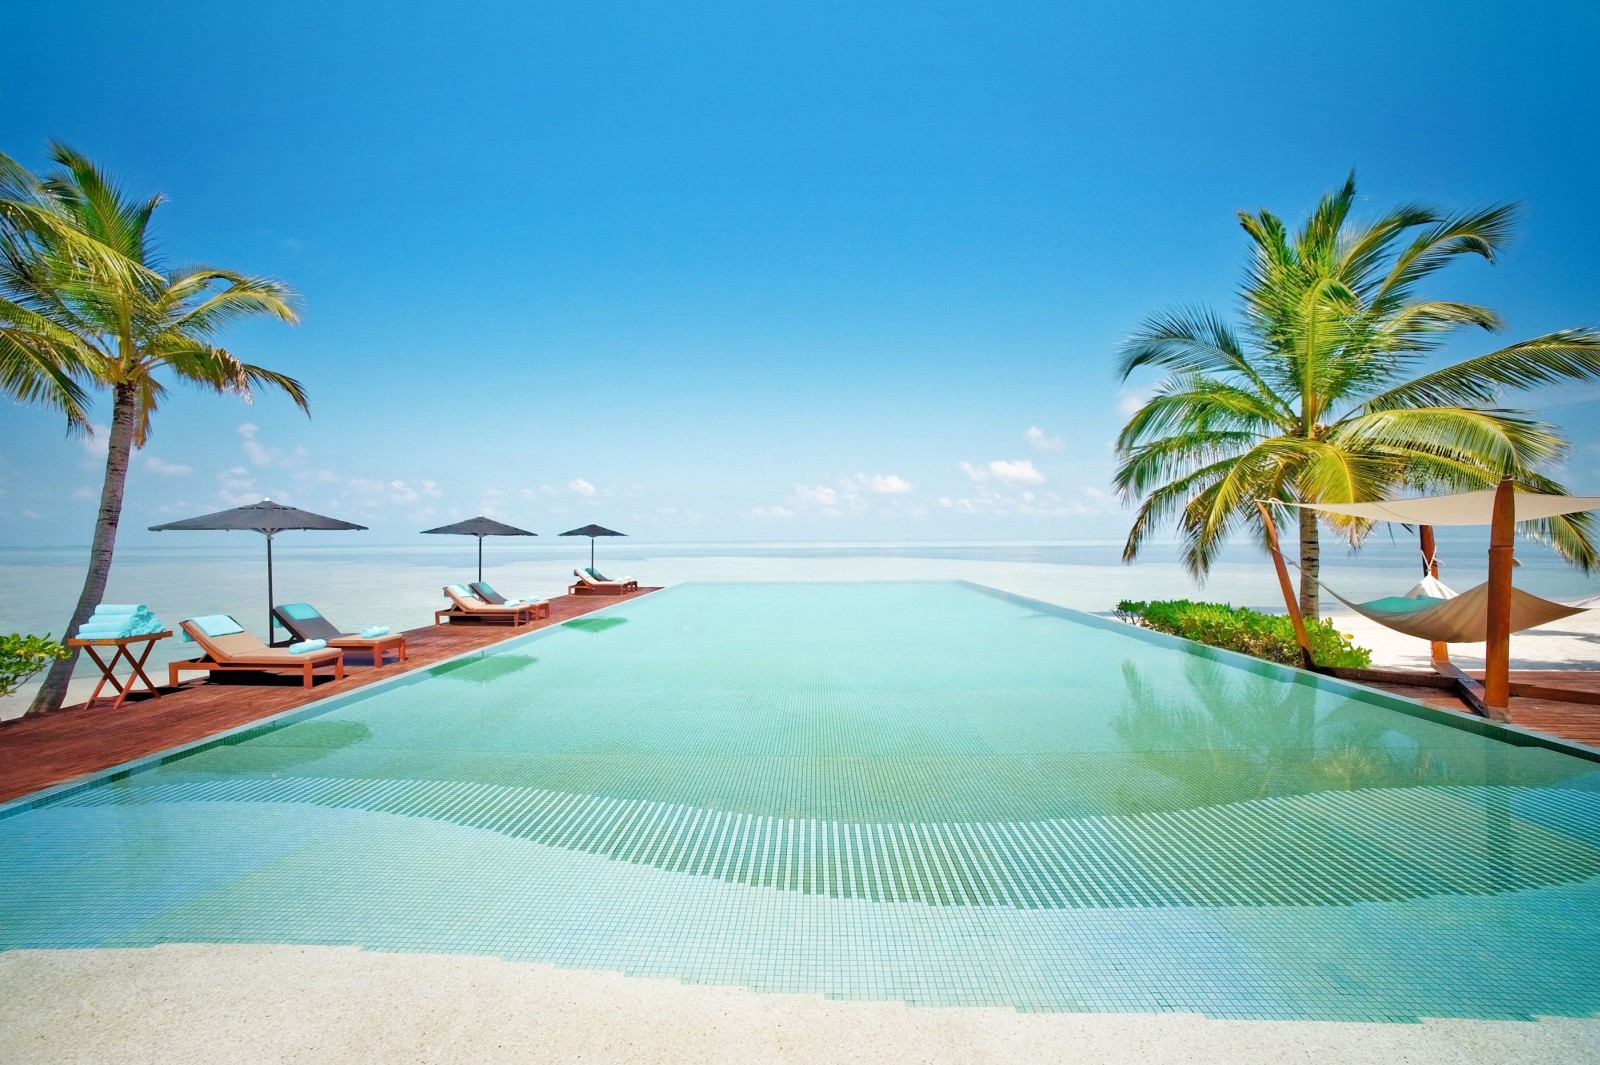 The infinity pool of LUX Maldives